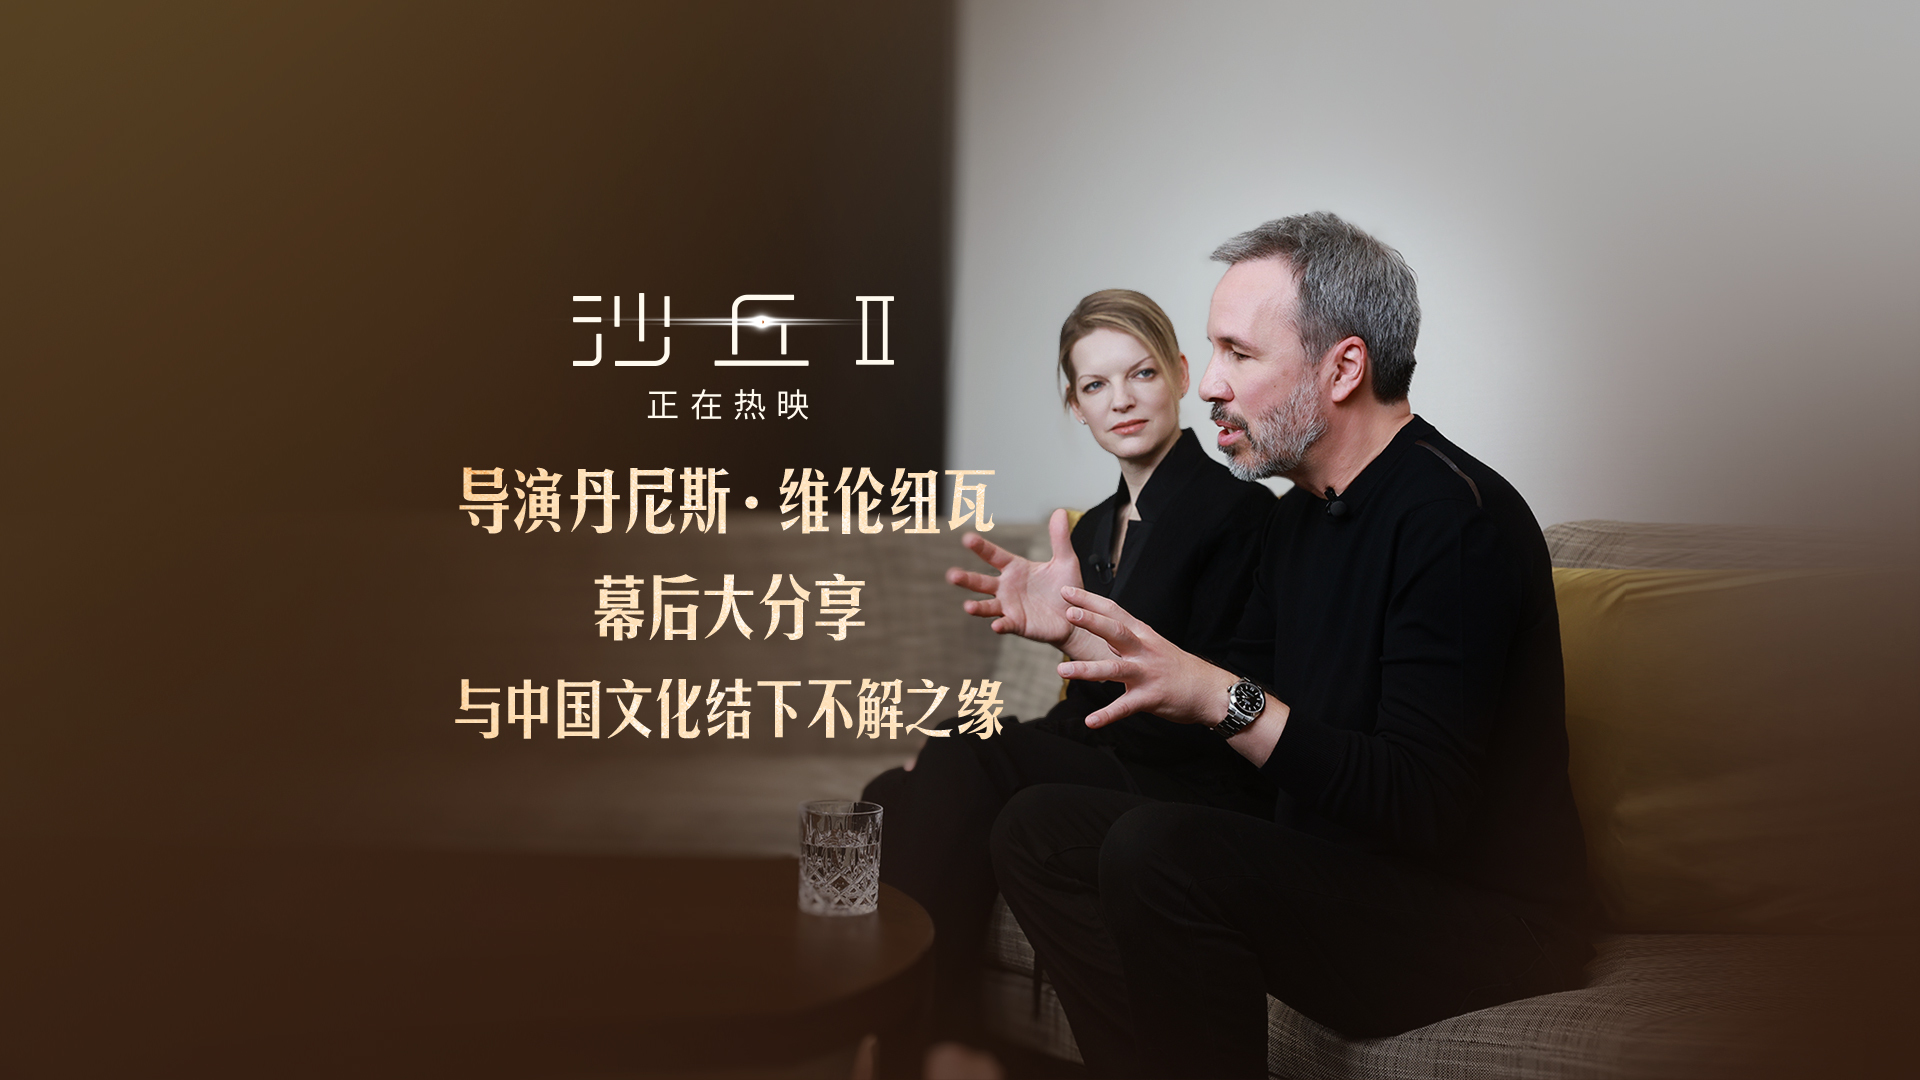 The director of the film Dune 2, which has a high reputation in China, was deeply influenced by China culture.